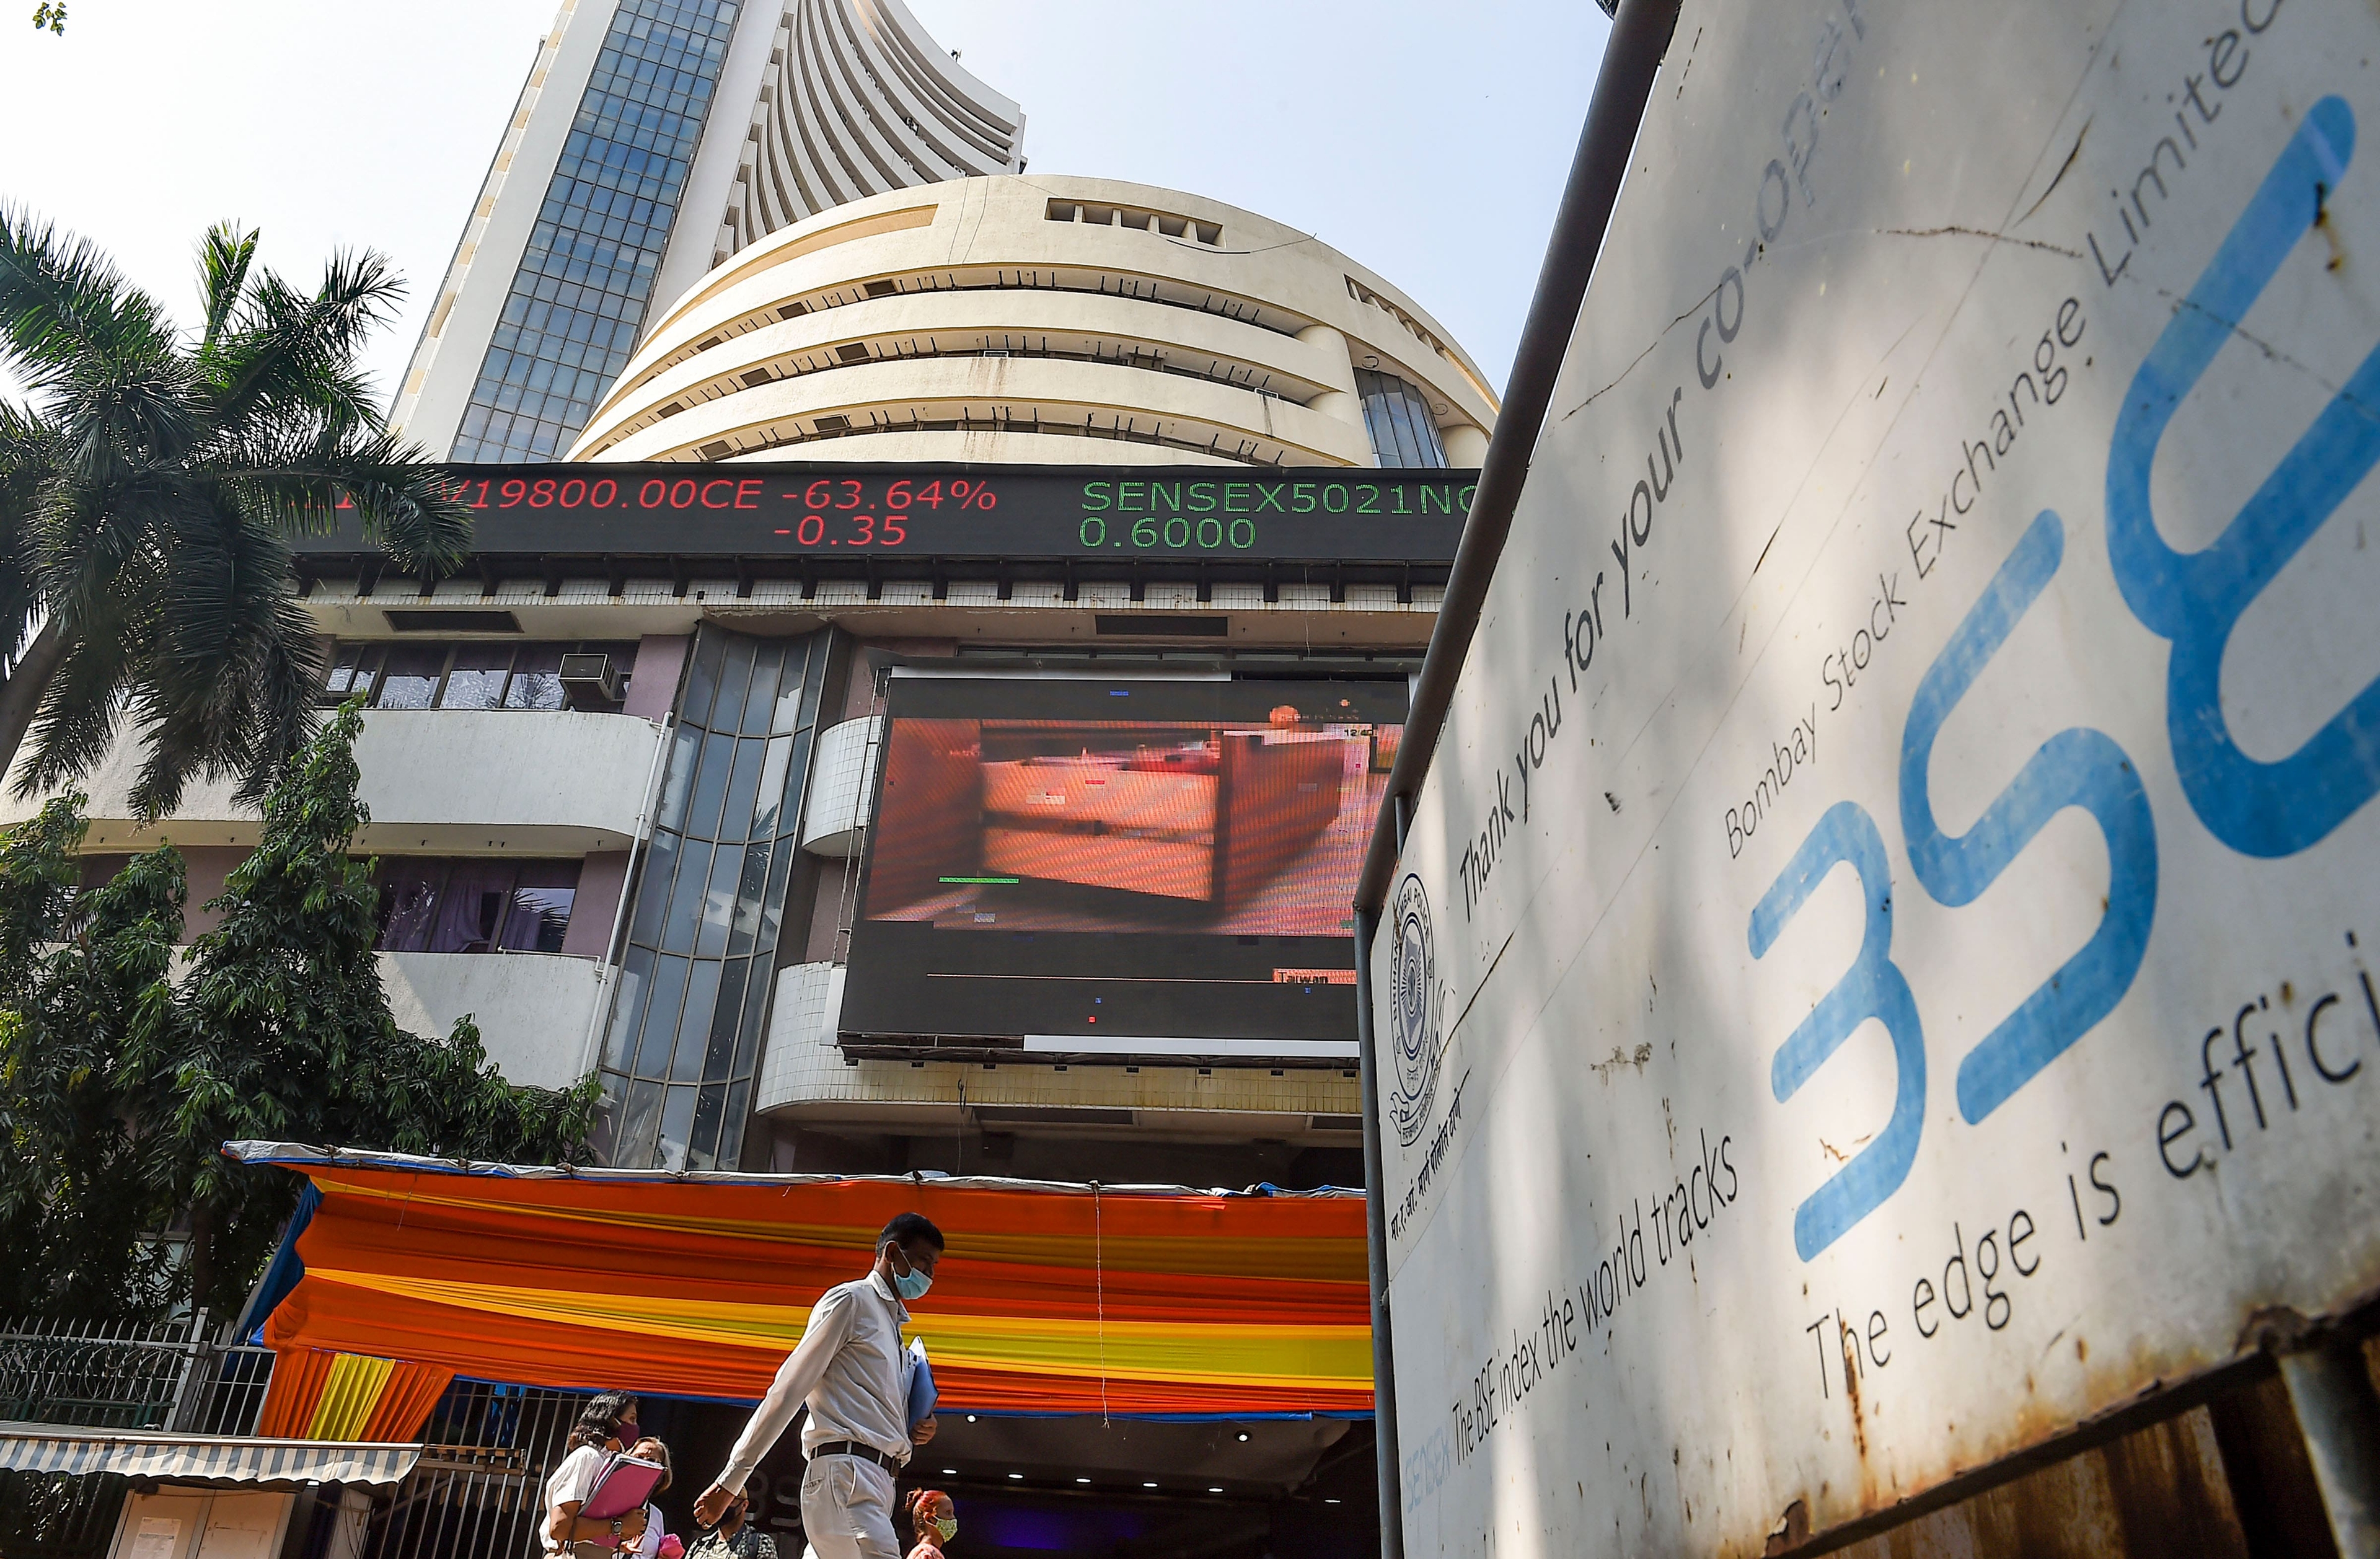 Market remained under pressure on May 11, with equity benchmarks the Sensex and the Nifty extending the losses into the fourth consecutive session. Sensex closed 276 points, 0.51 percent, lower at 54,088.39.